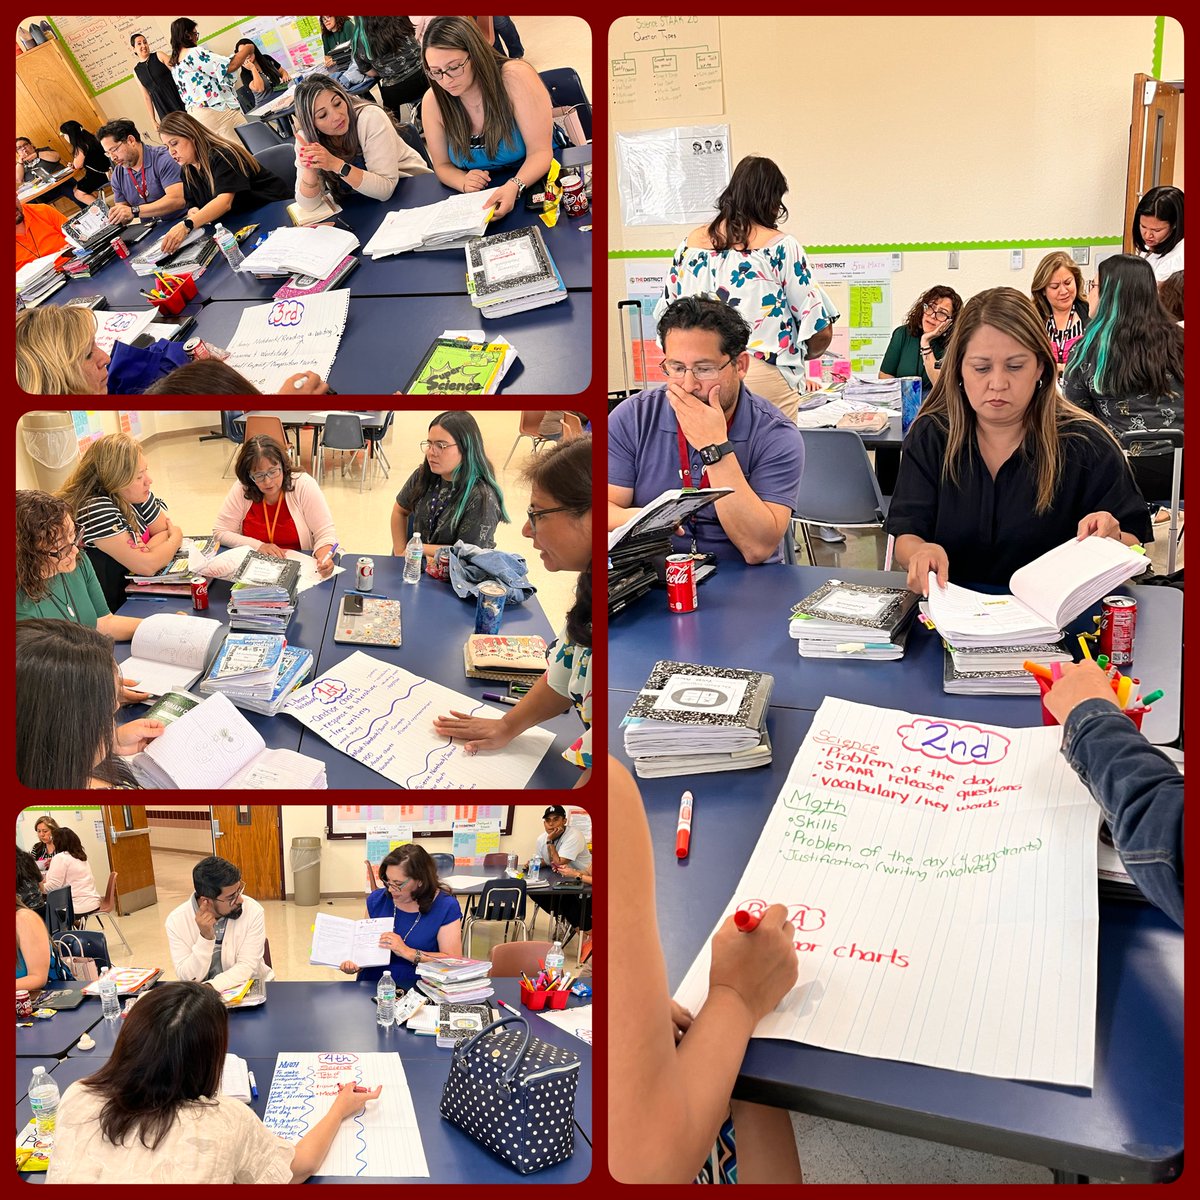 It’s never too early to prepare for the upcoming school year. During today’s Campus PLC our teachers worked on aligning interactive journal practices across content areas & grade levels. #OneTribe #BowUp 🏹 @YsletaISD @_IreneAhumada @BrendaChR1